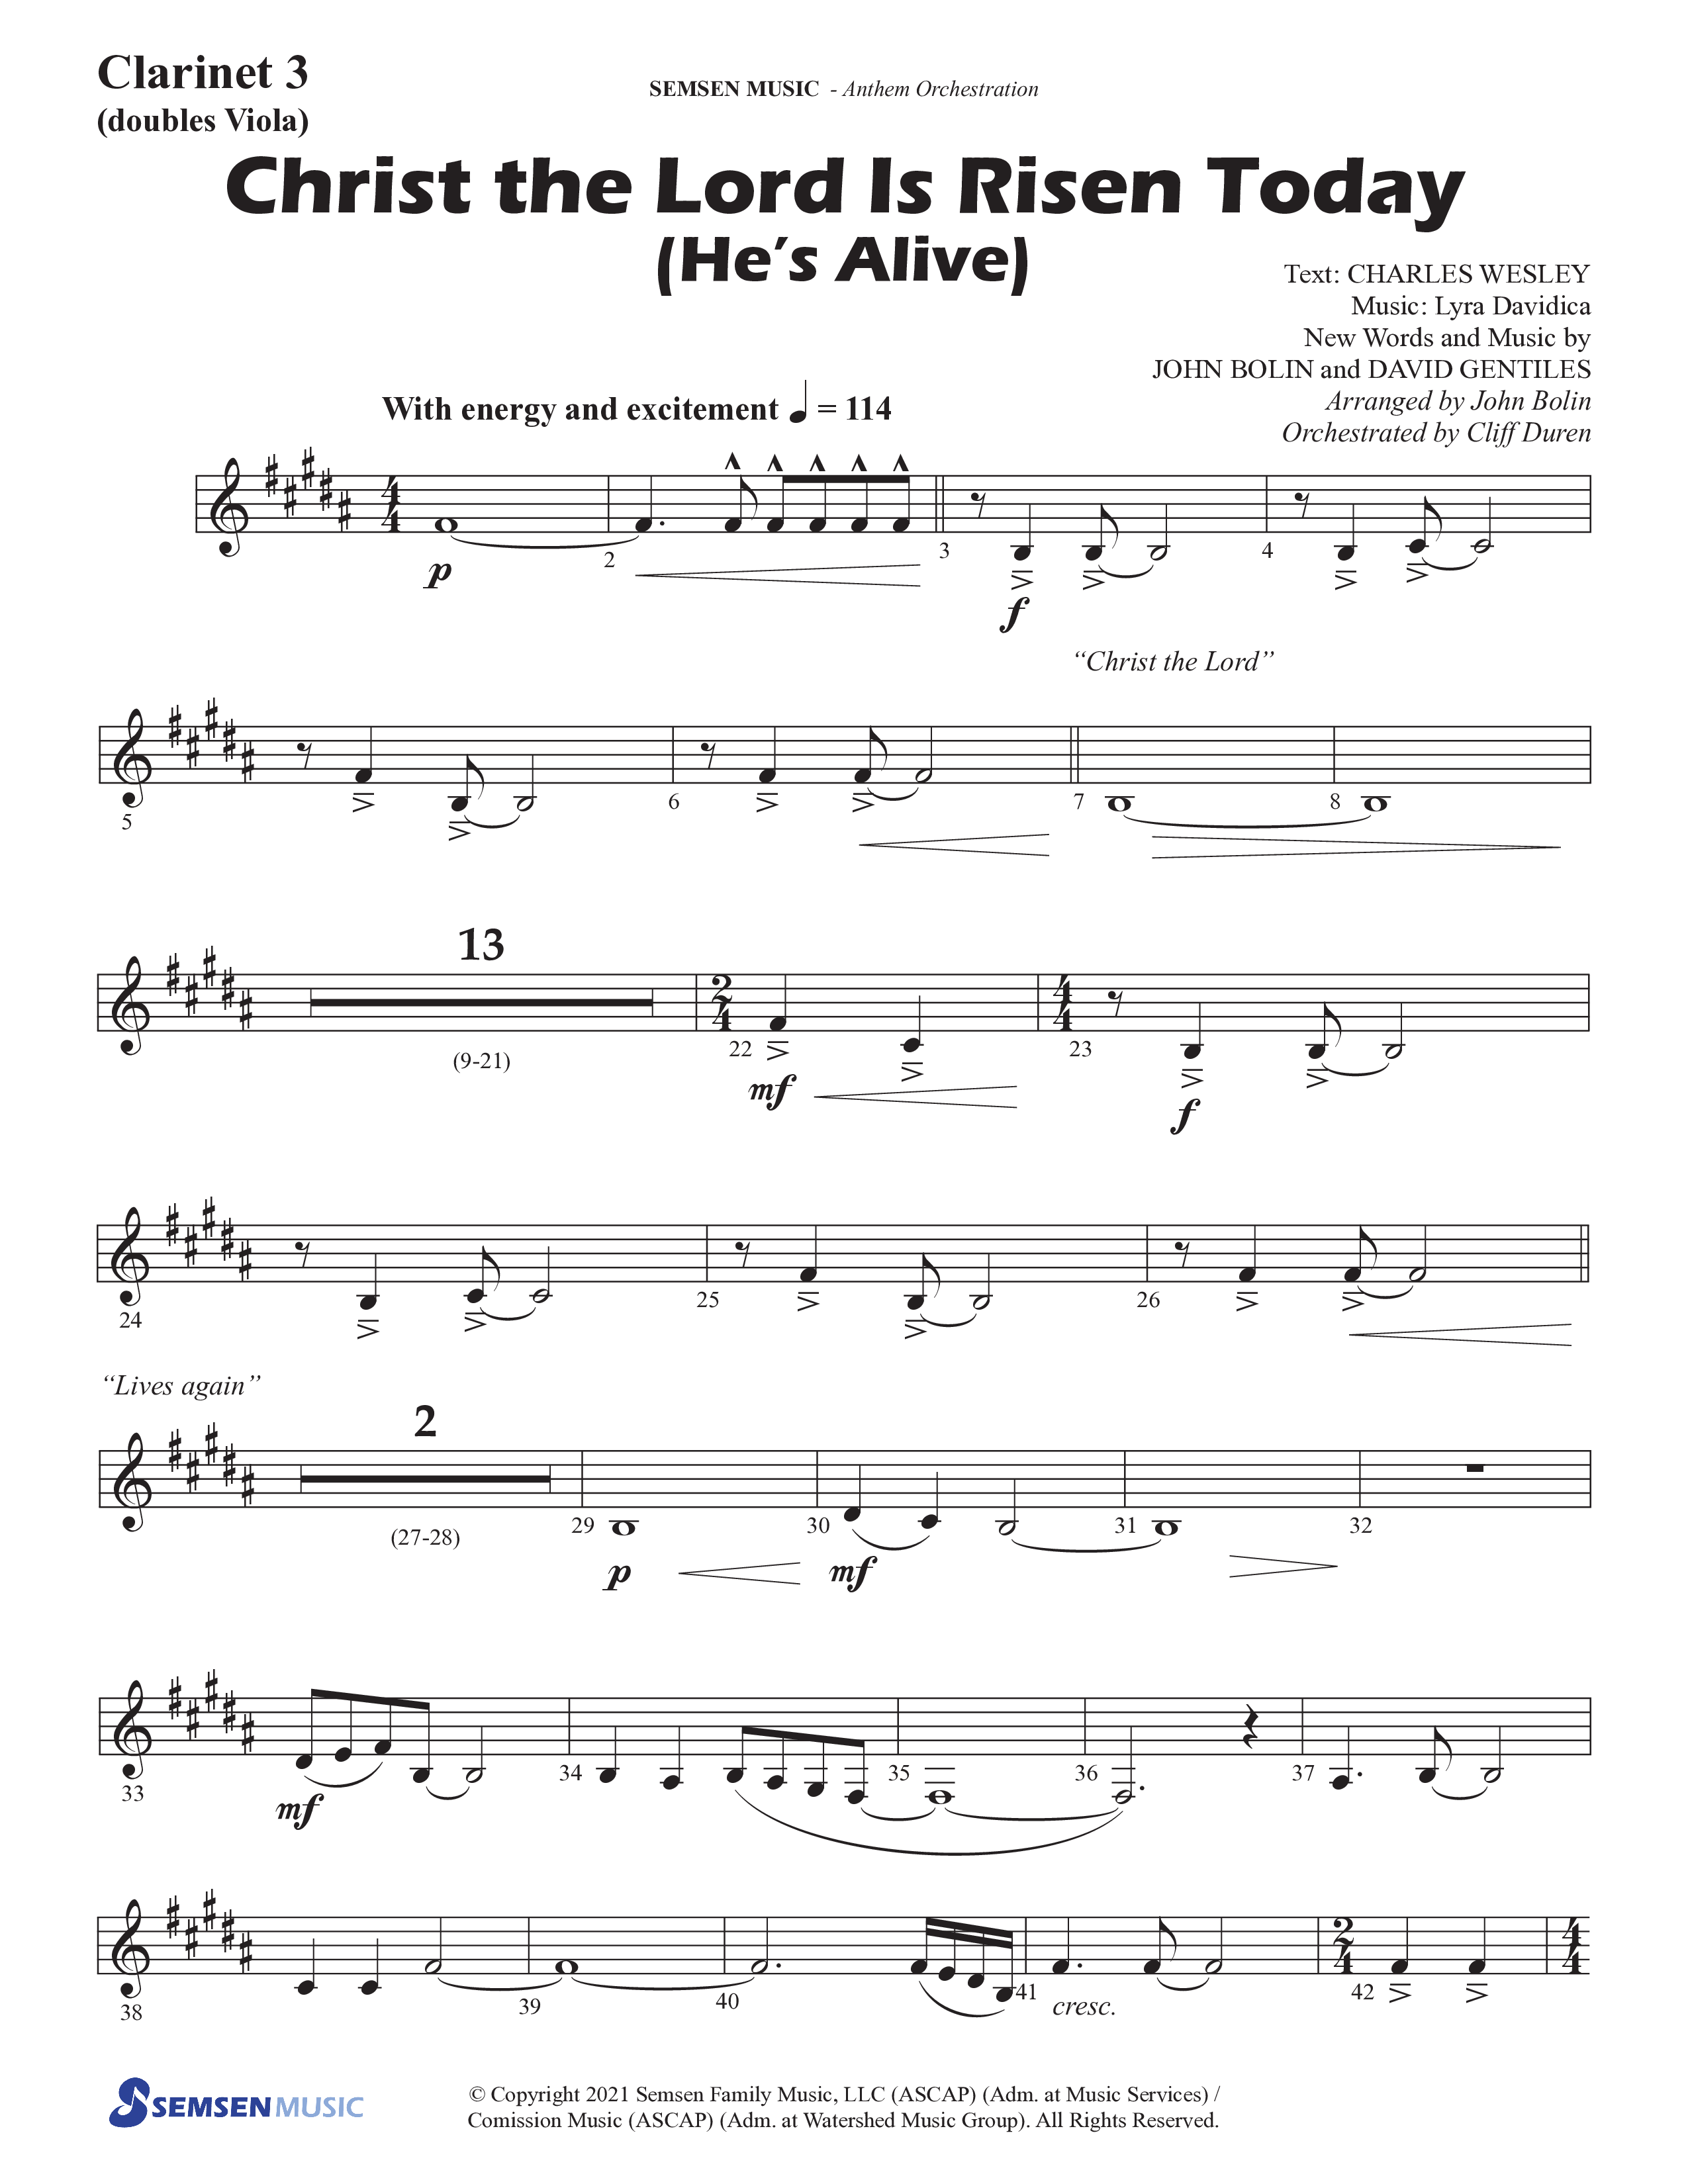 Christ The Lord Is Risen Today (He's Alive) (Choral Anthem SATB) Clarinet 3 (Semsen Music / Arr. John Bolin / Orch. Cliff Duren)